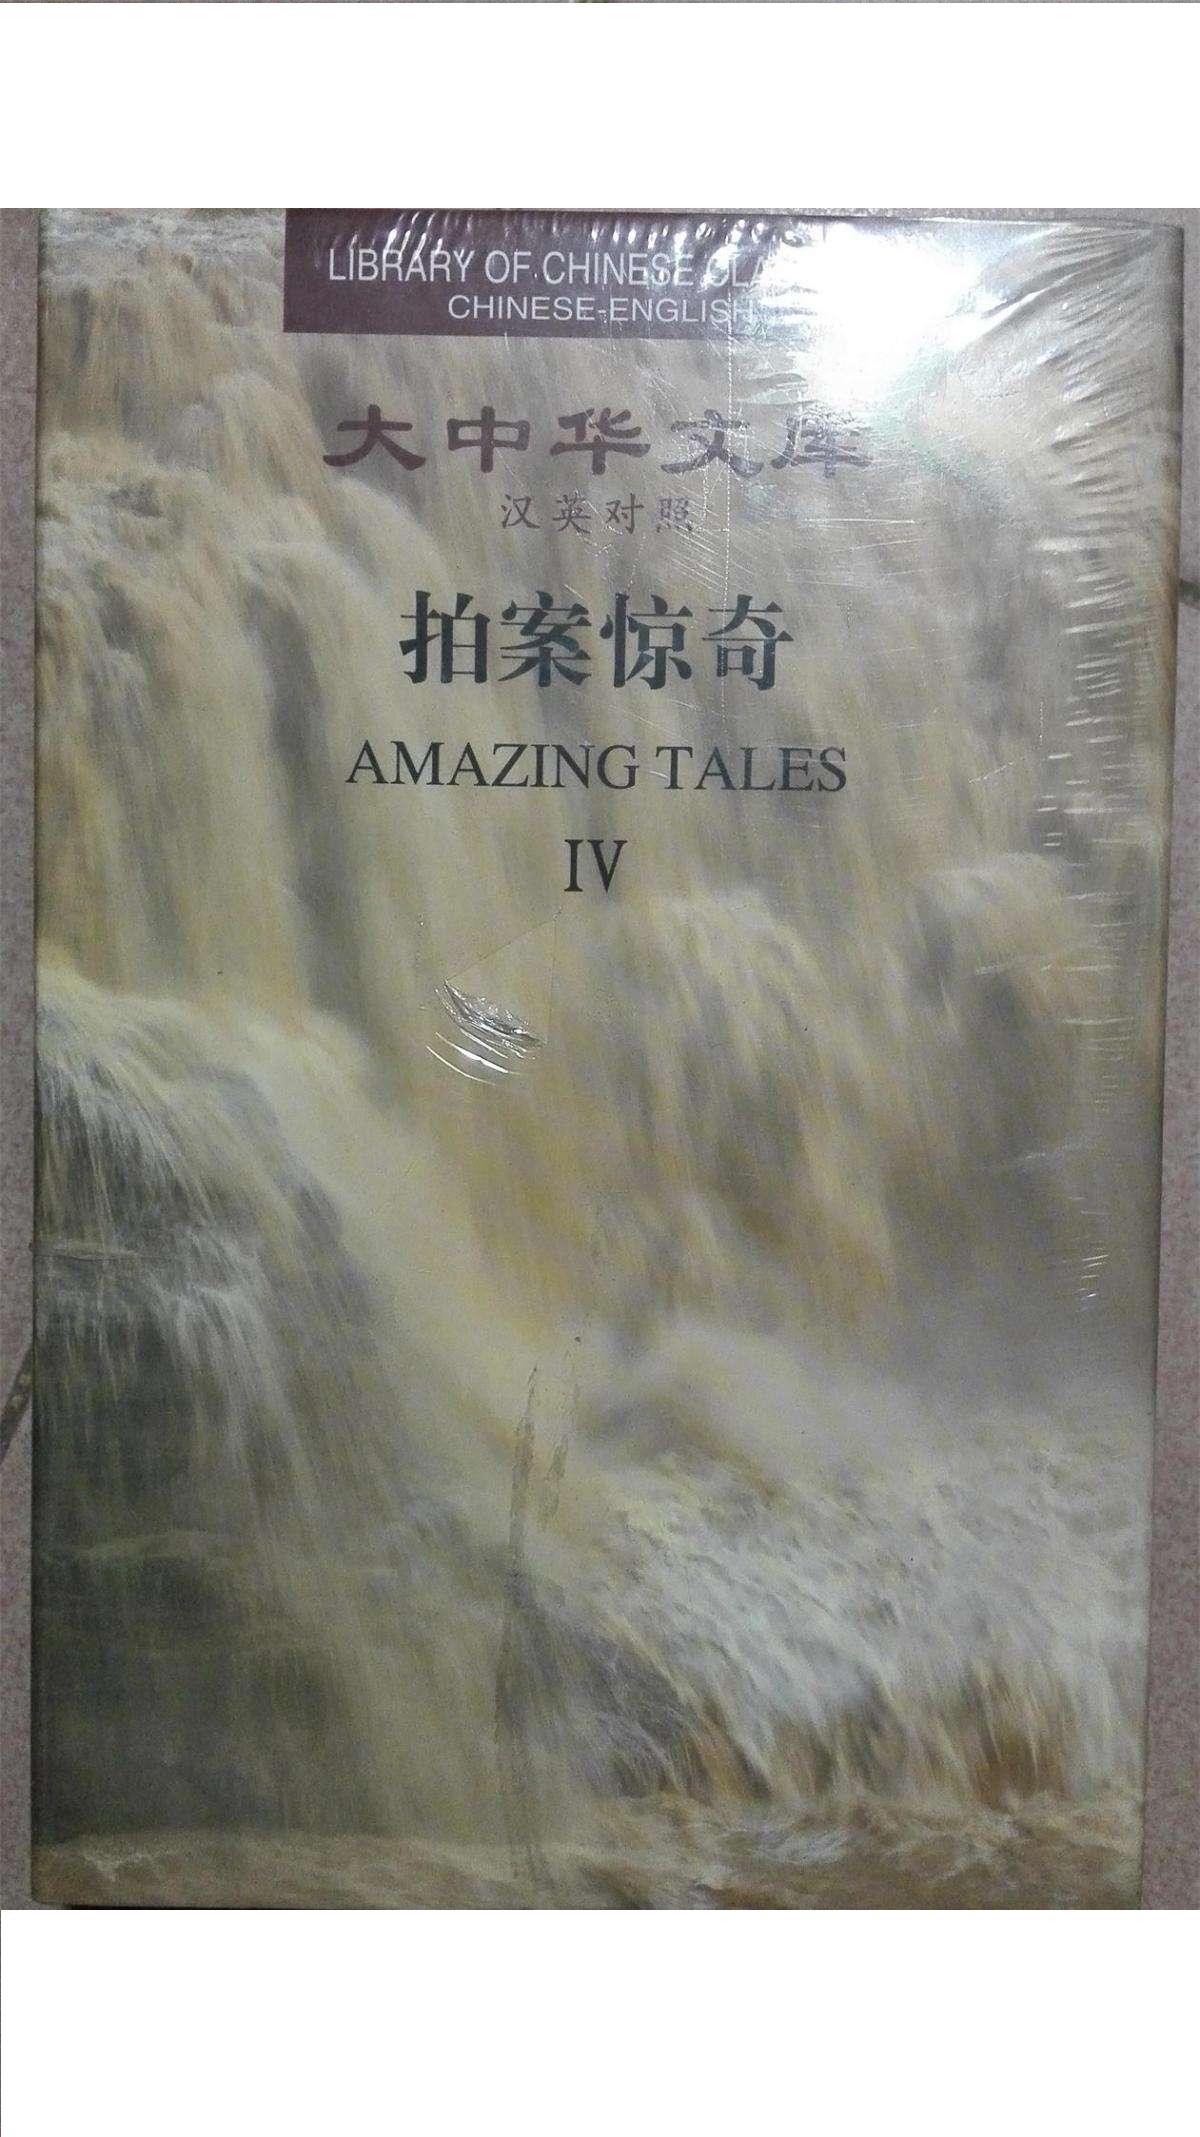 Library of Chinese Classics: Amazing Tales